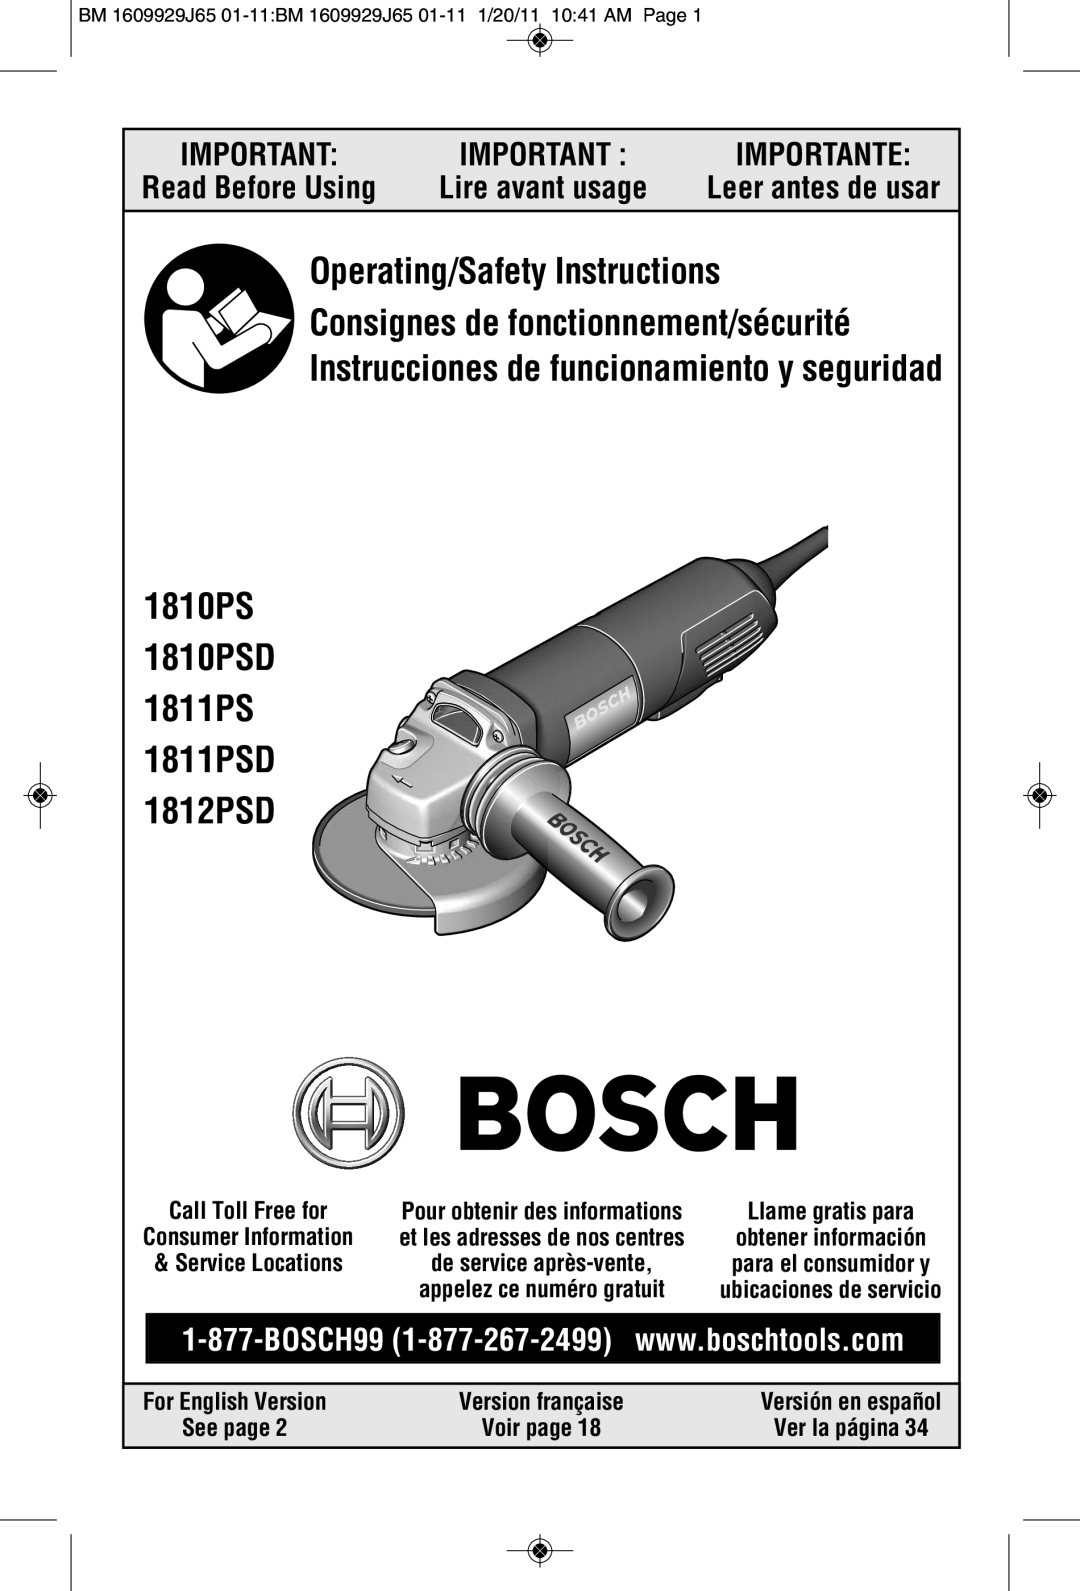 Bosch Power Tools 1811PS manual Read Before Using, Lire avant usage, Leer antes de usar, Call Toll Free for, See page 